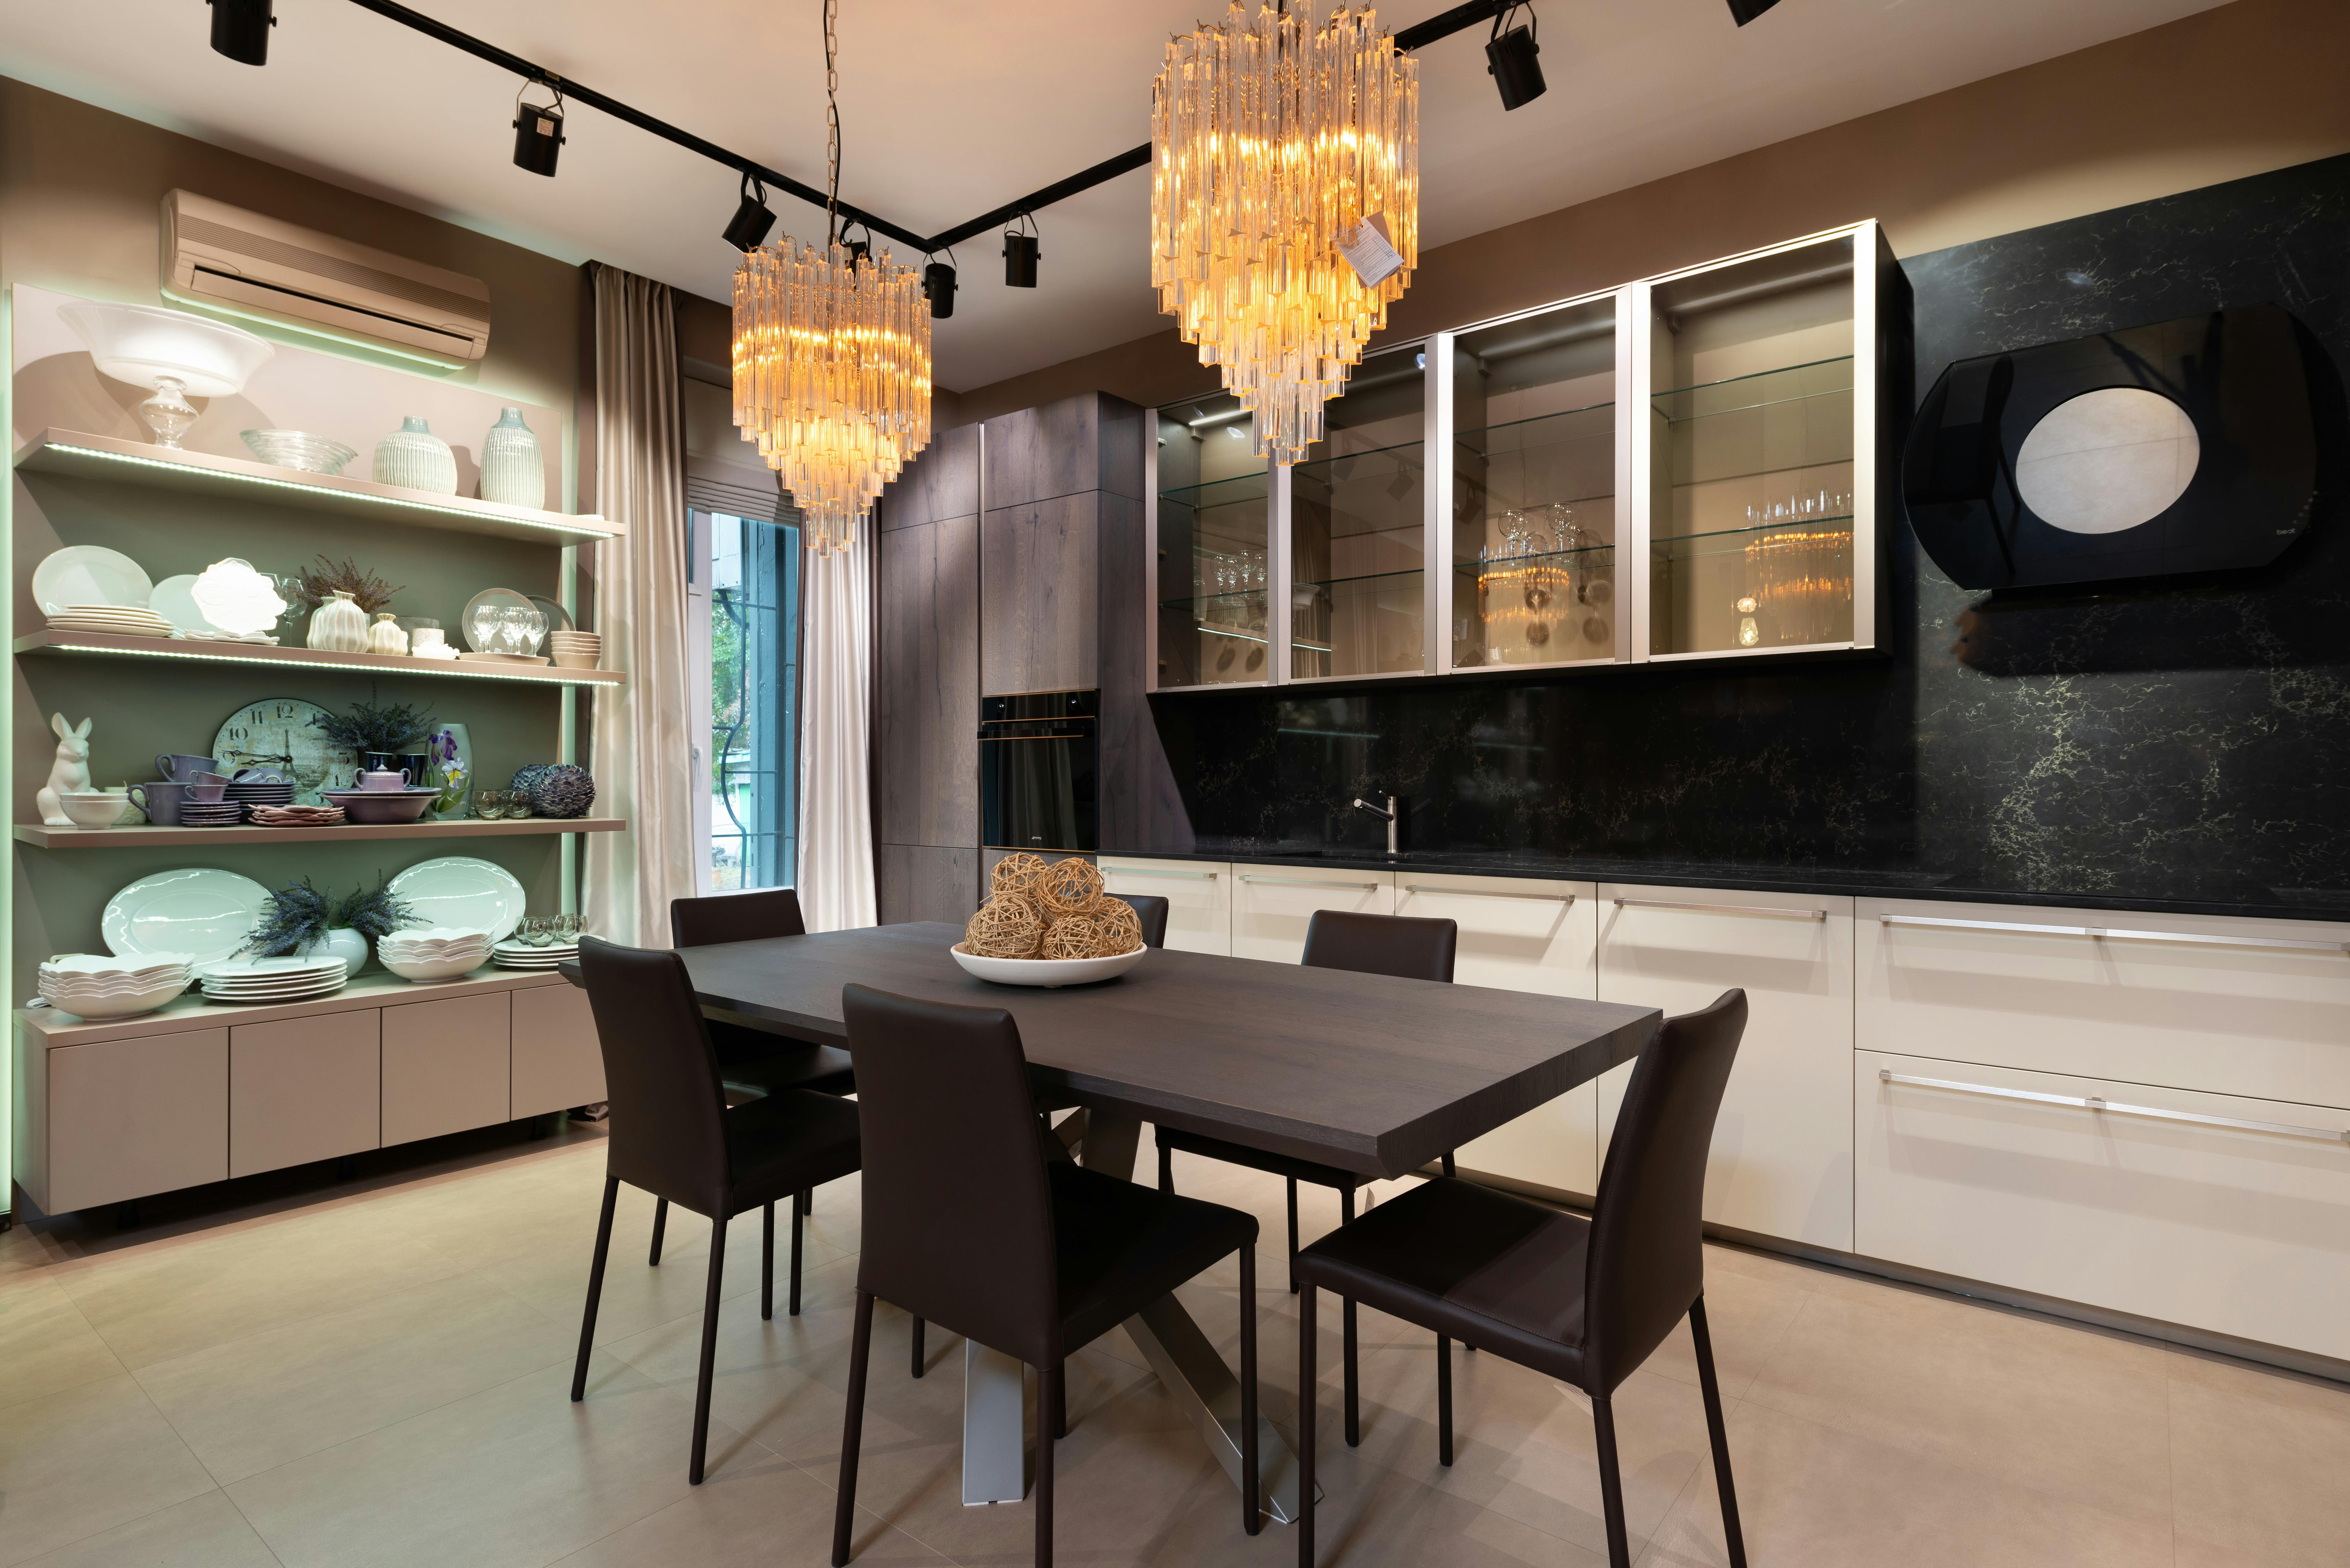 stylish interior of modern kitchen with crystal chandeliers and wooden furniture